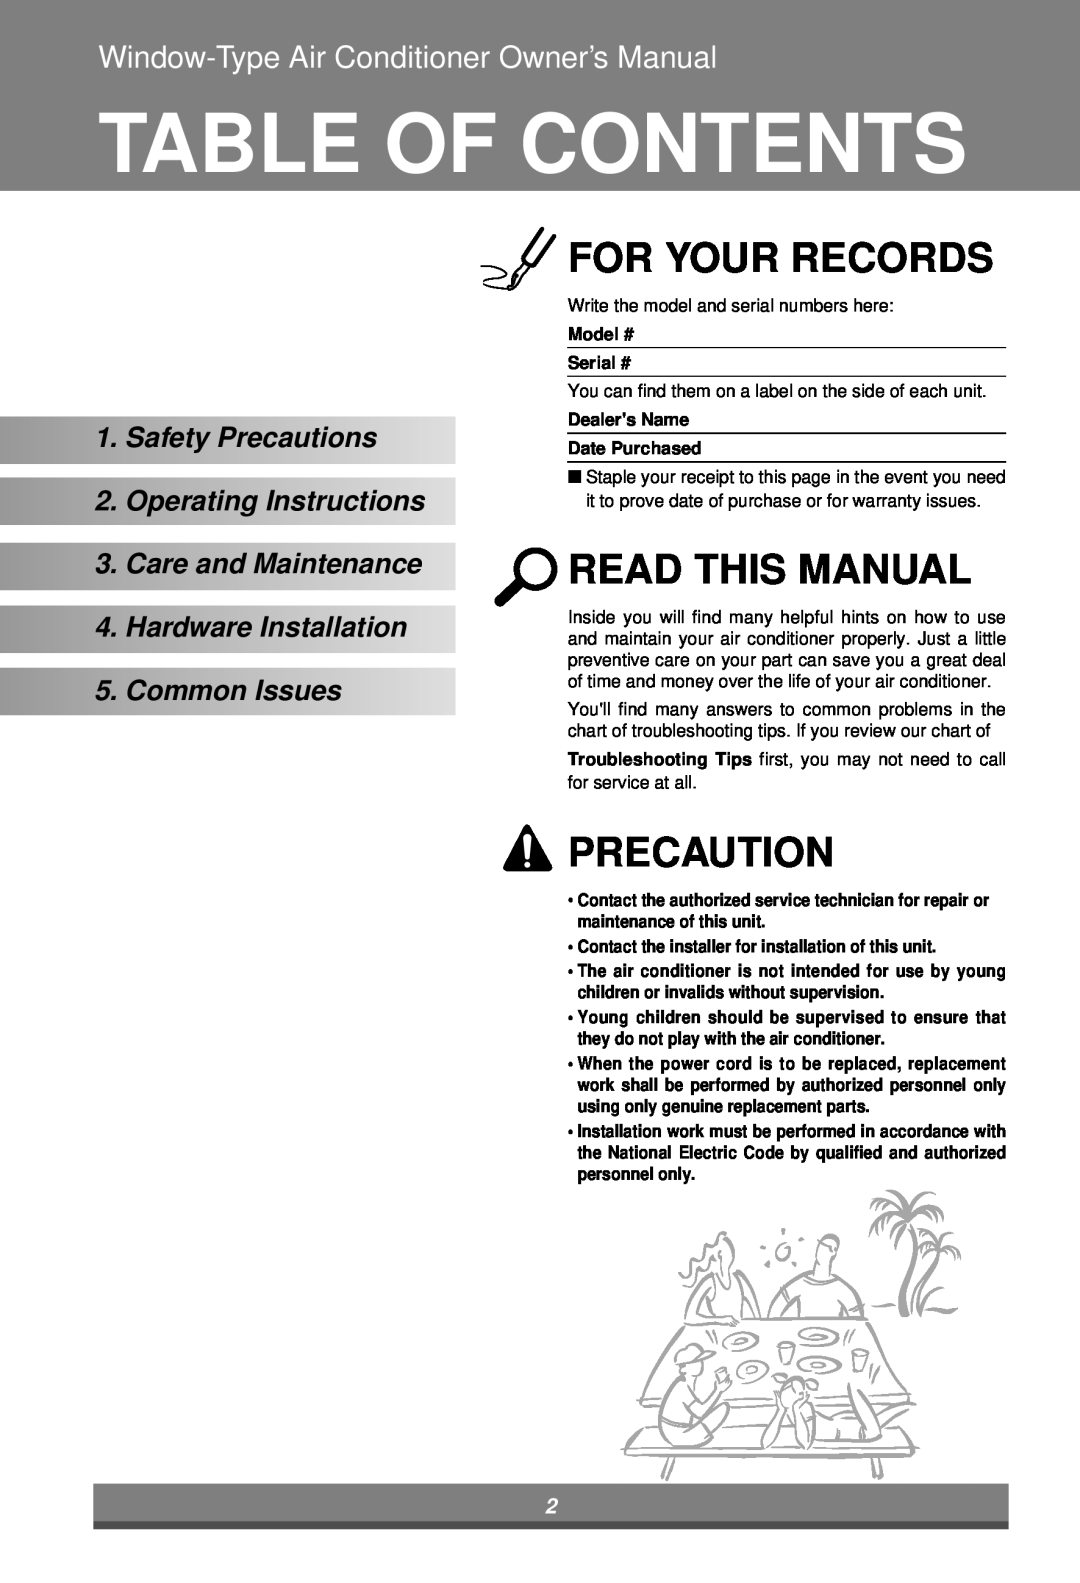 LG Electronics LW7000ER owner manual SafetyPrecautions 2.OperatingInstructions 3.CareandMaintenance, Table Of Contents 